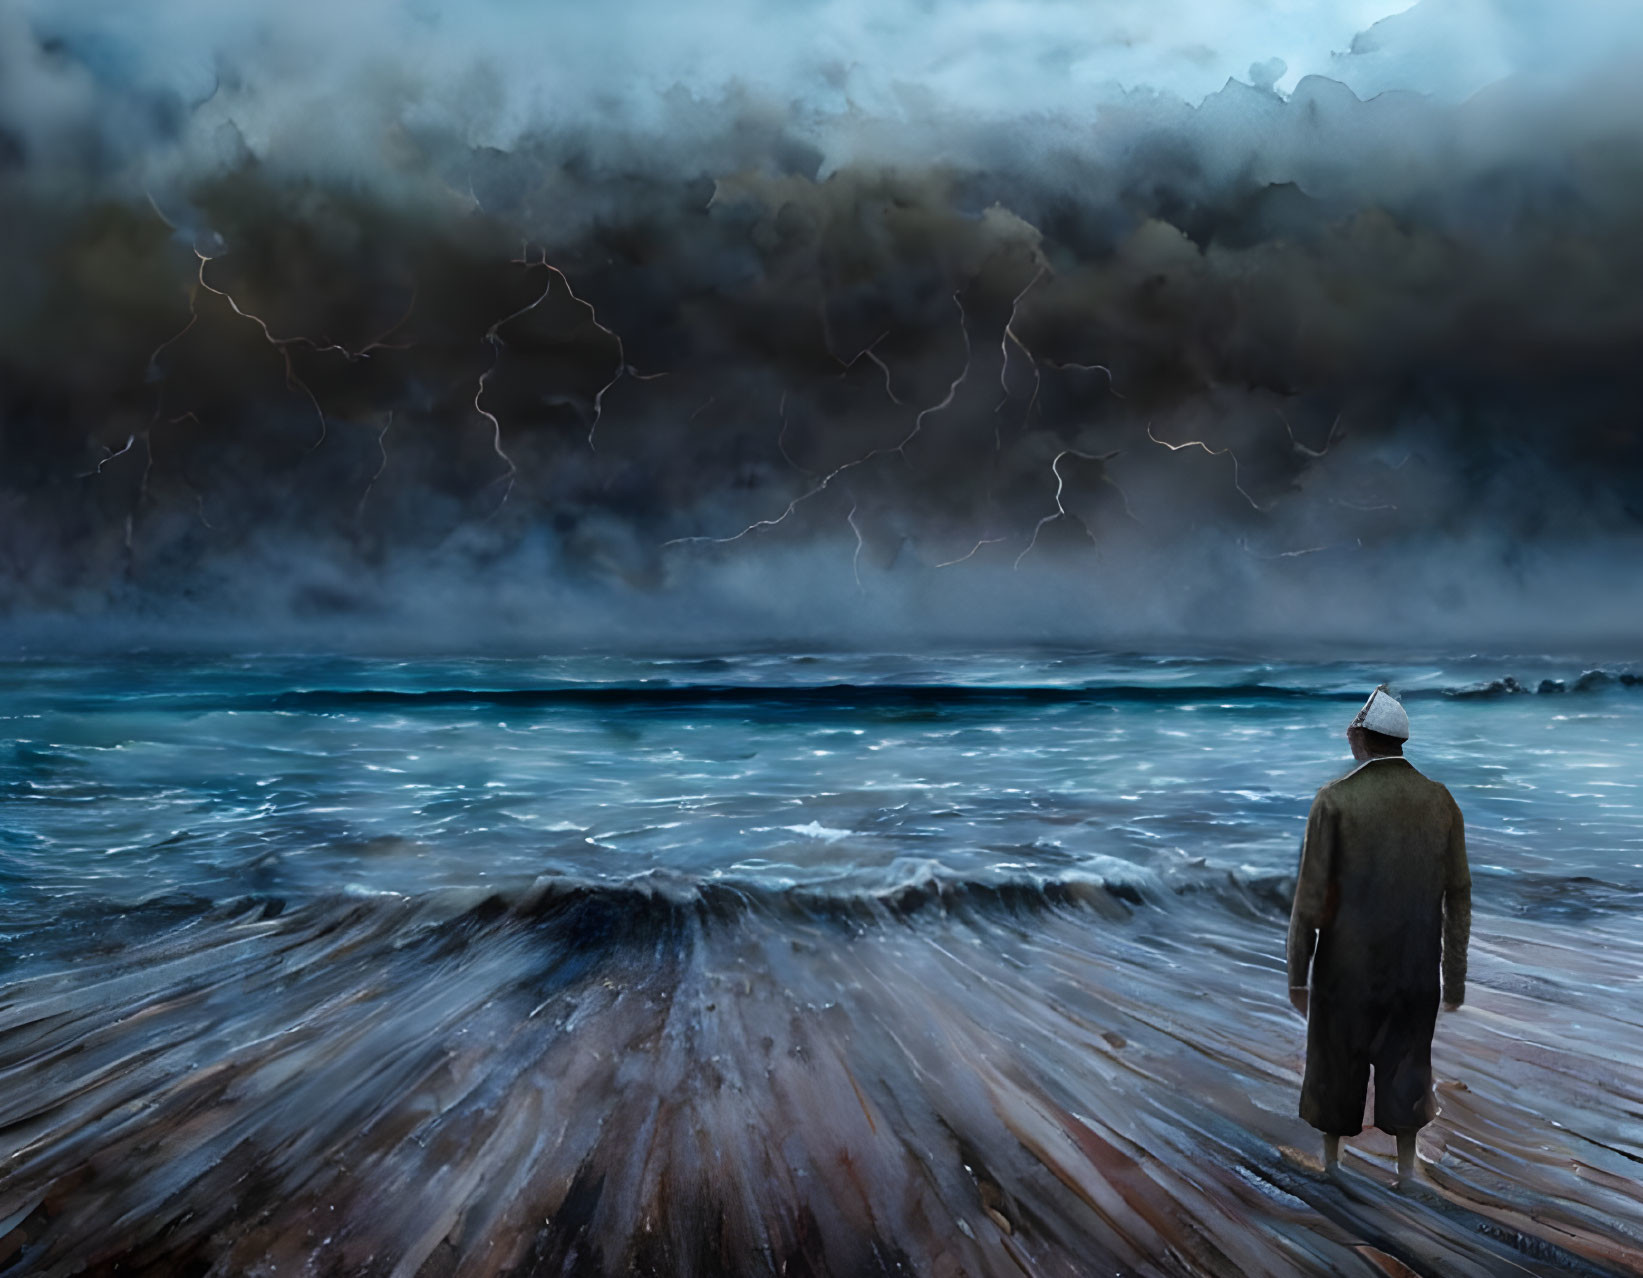 The man, the sea and the storm